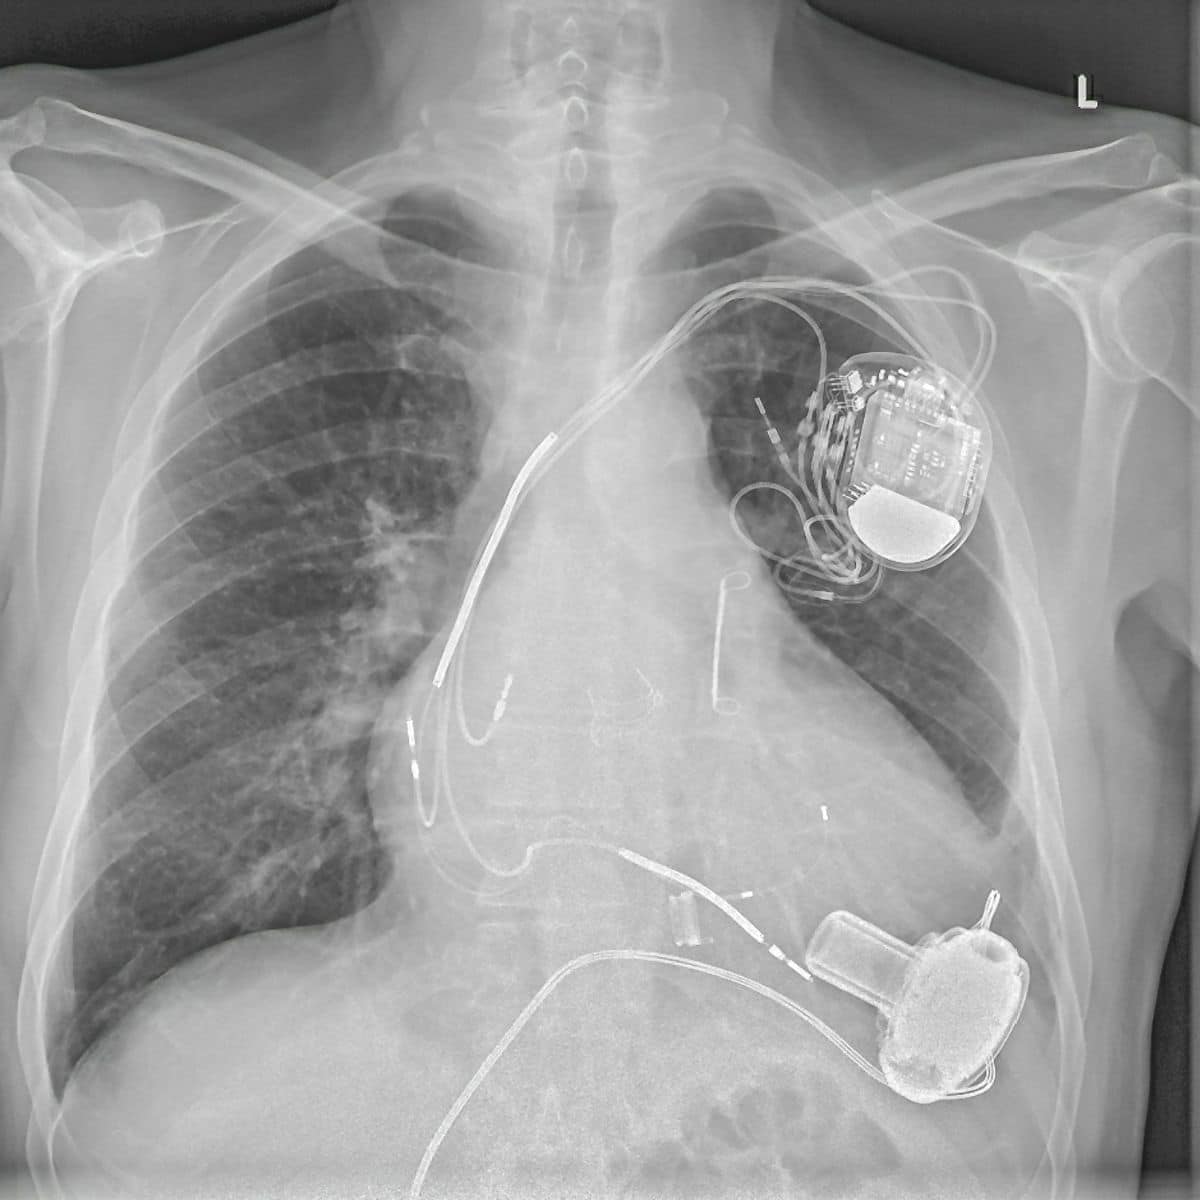 x-ray showing a Left Ventricular Assist Device (LVAD)